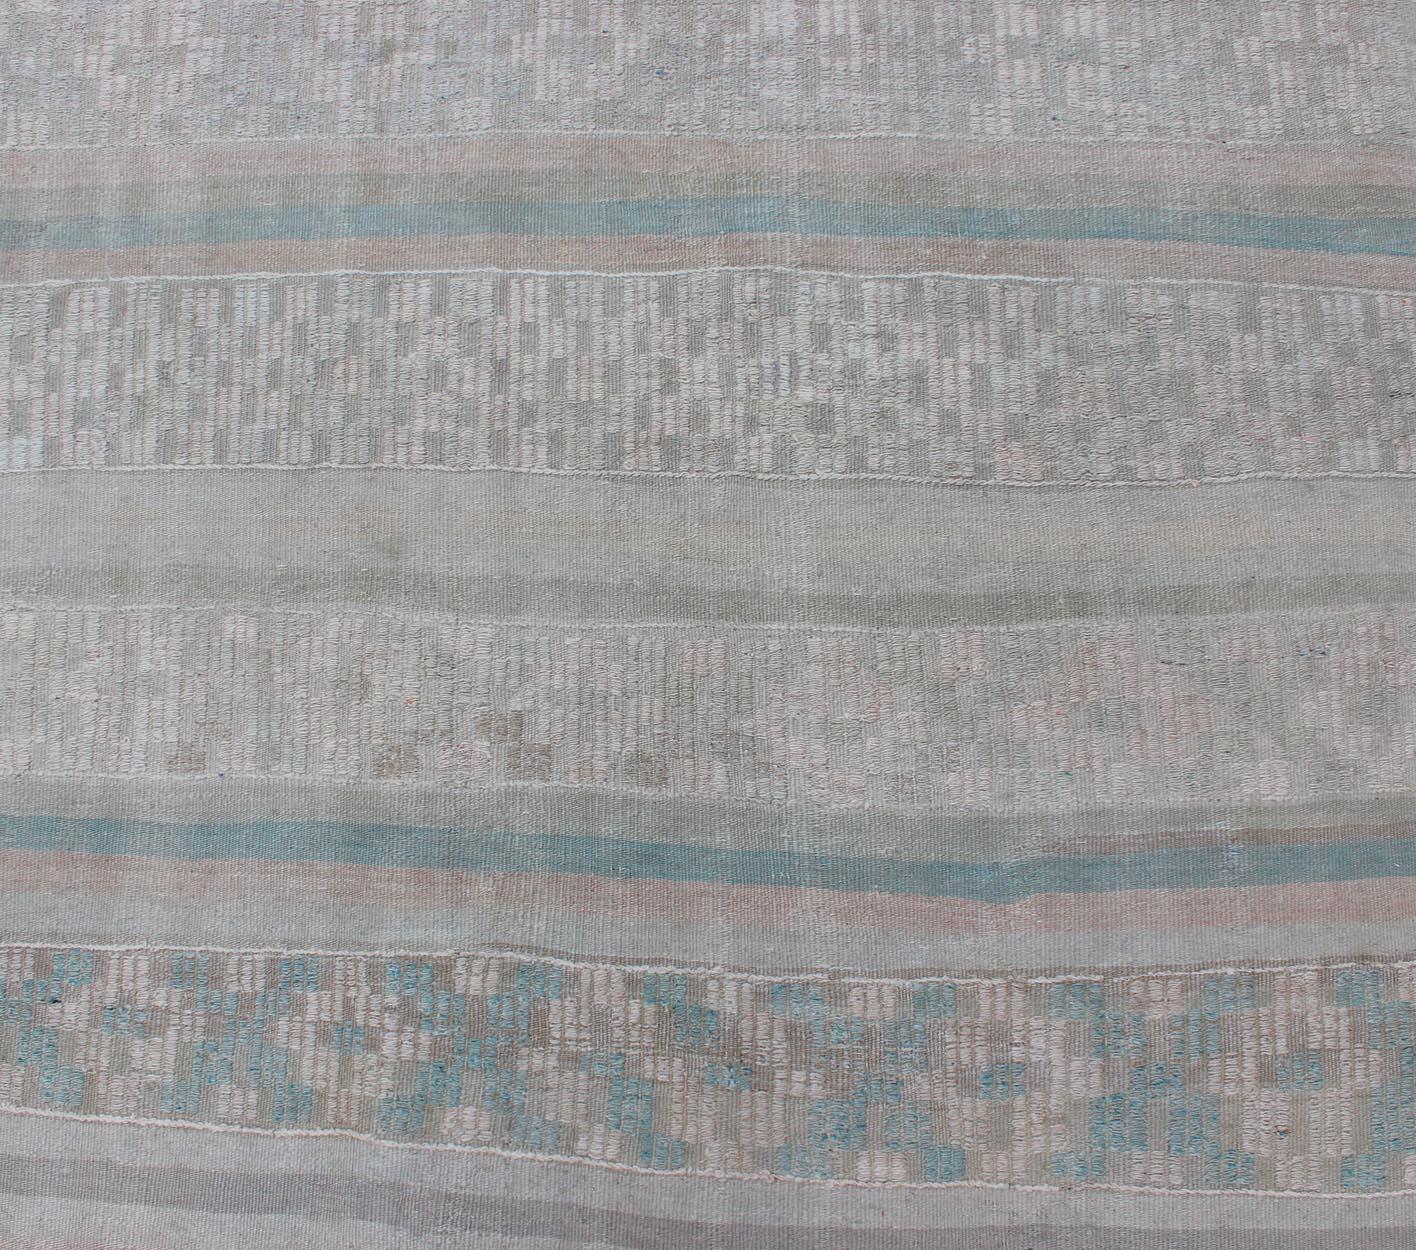 Wool Vintage Flat-Weave Kilim with Embroideries in Blush, Green, Blue and Gray For Sale